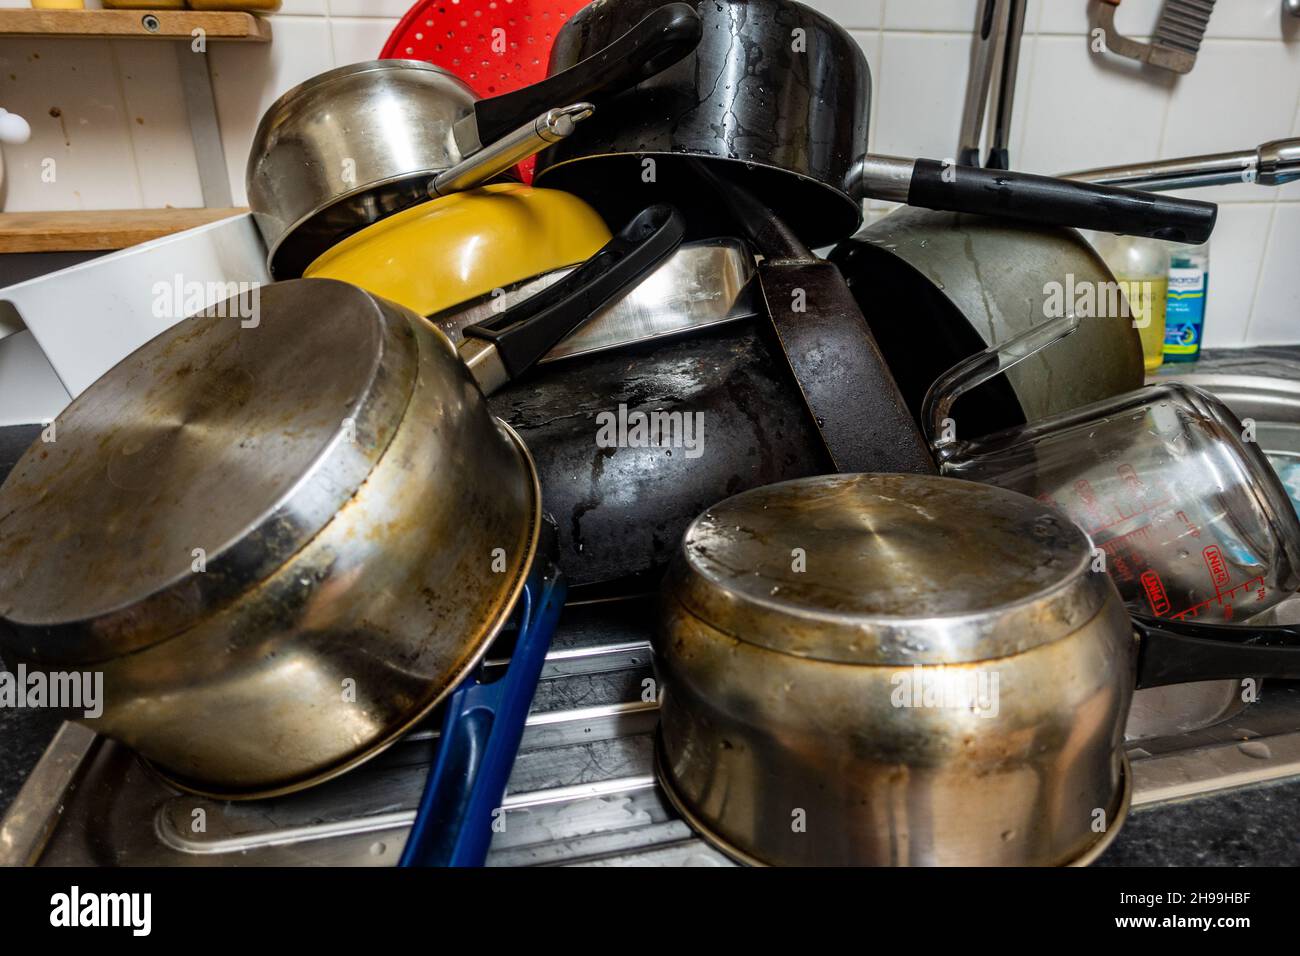 https://c8.alamy.com/comp/2H99HBF/big-pile-of-upside-down-cooking-pots-and-pans-2H99HBF.jpg